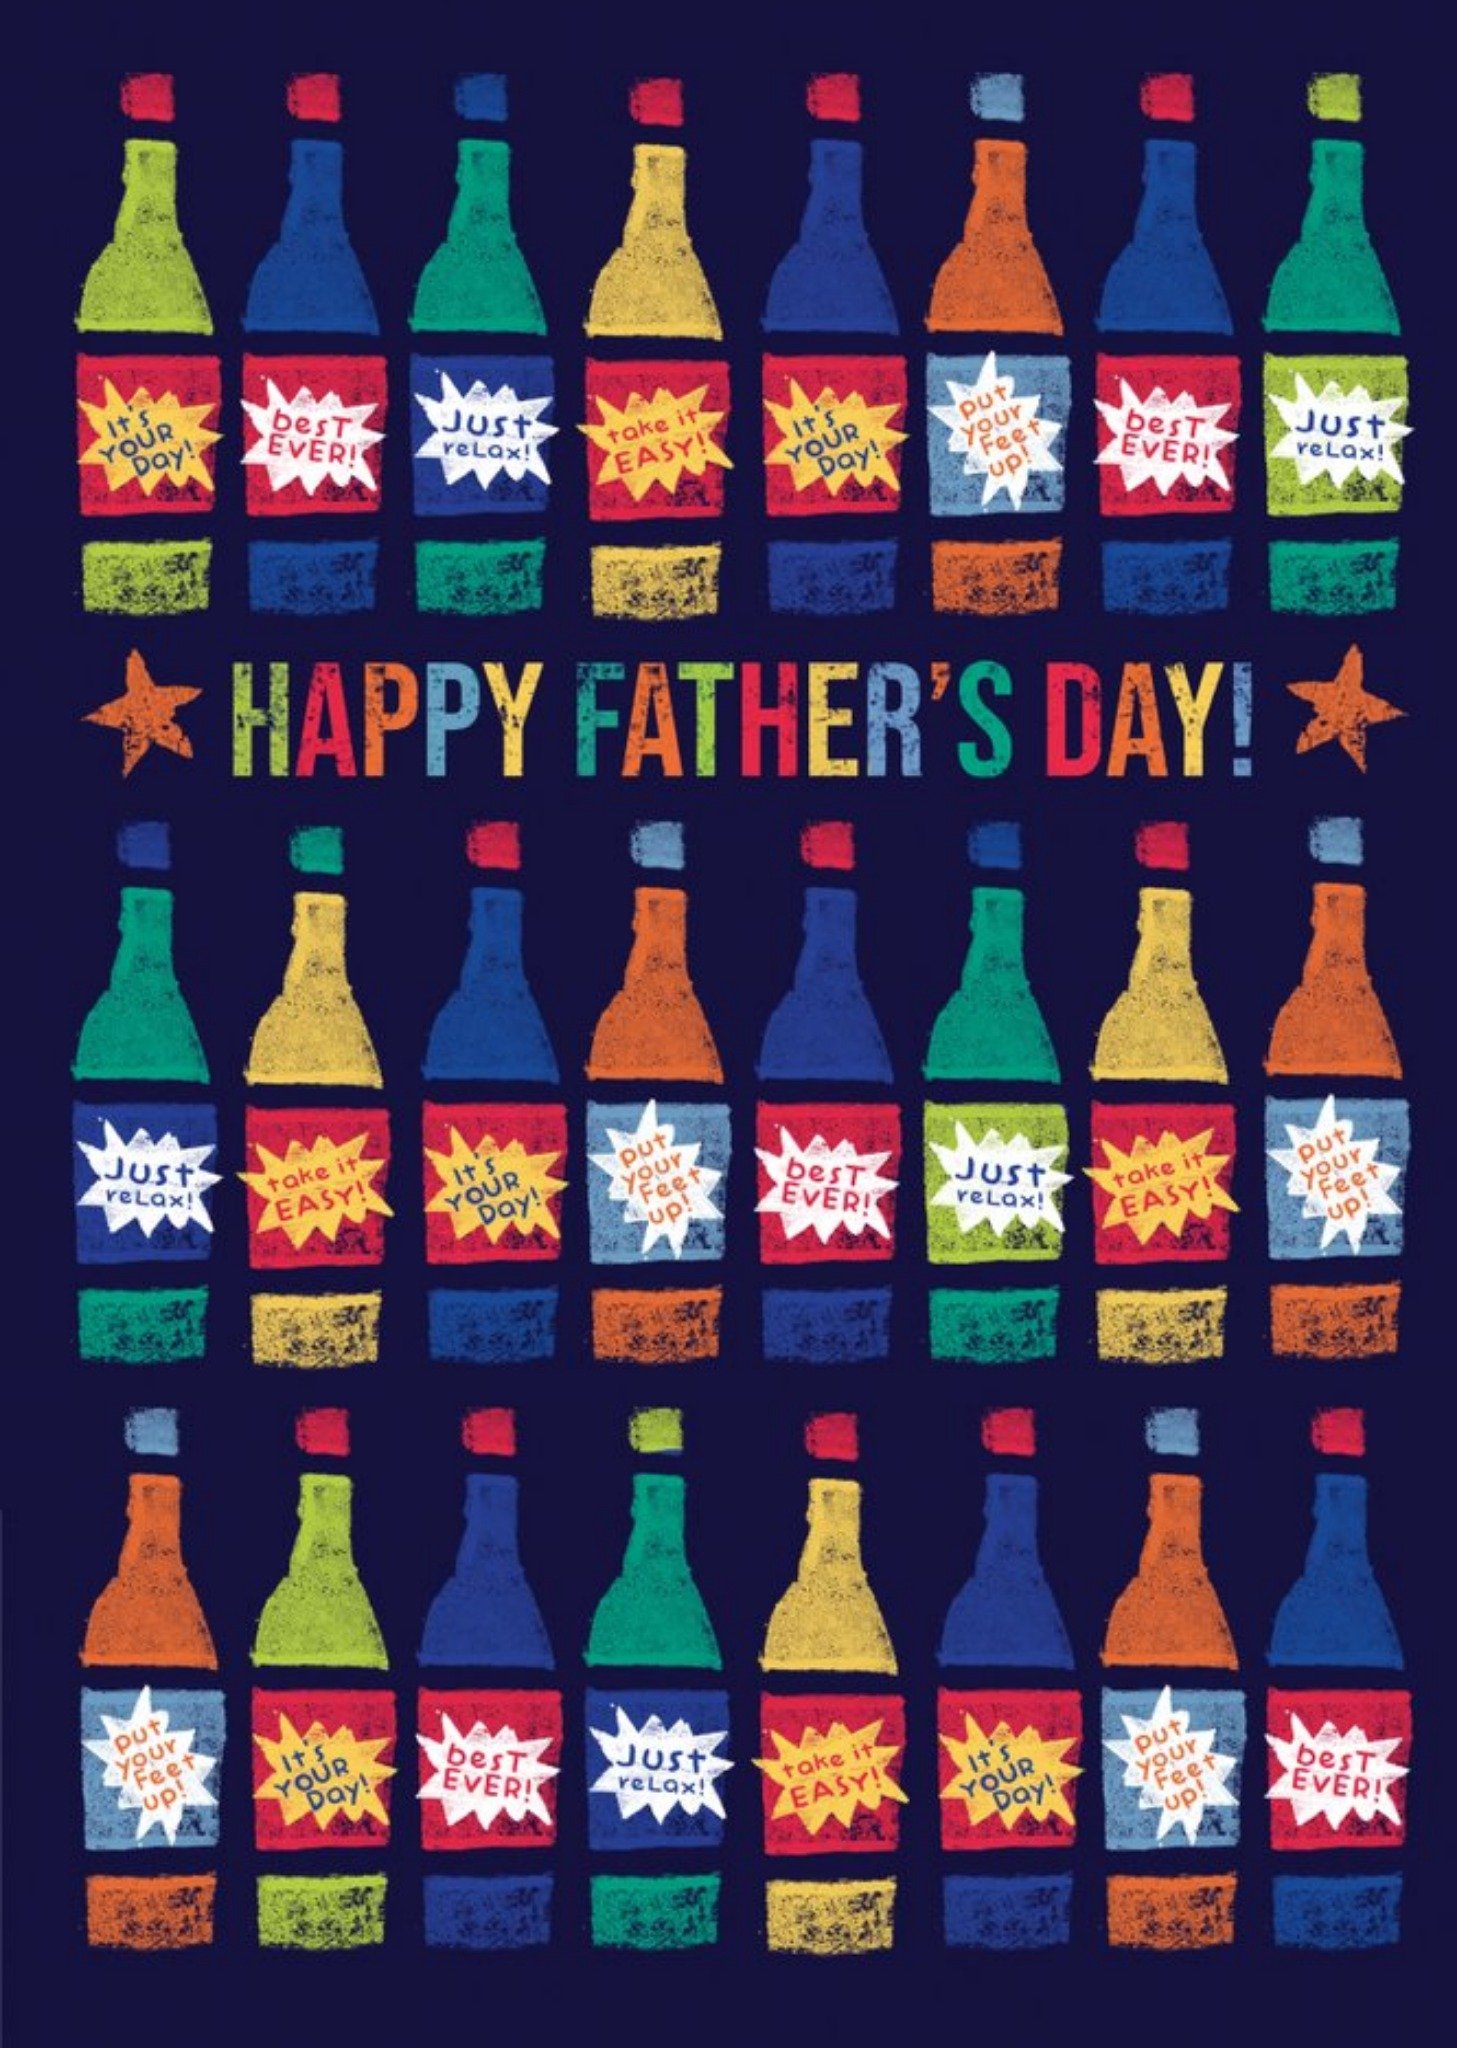 Moonpig Colourful Beer Bottles Father's Day Card Ecard